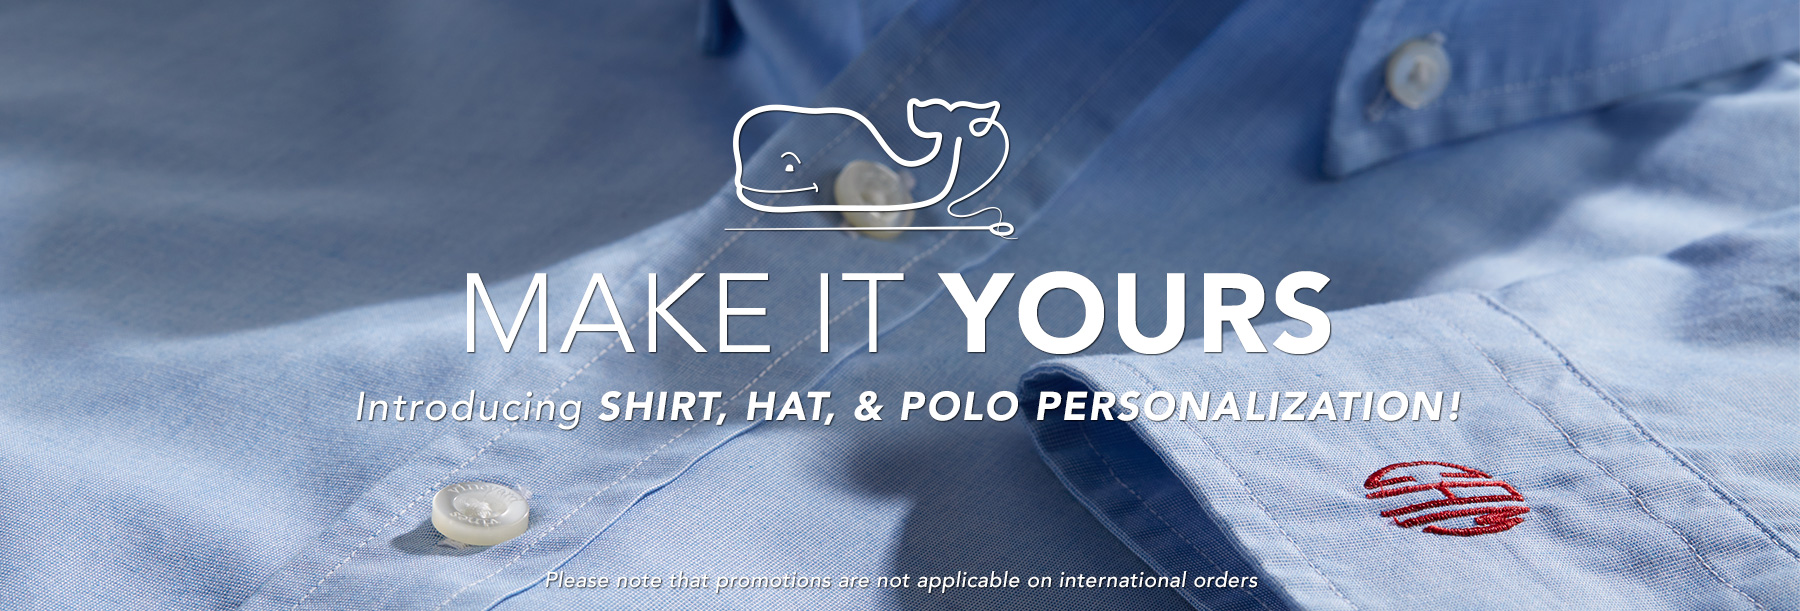 Make your mark. Introducing shirt, polo & hat personalization!